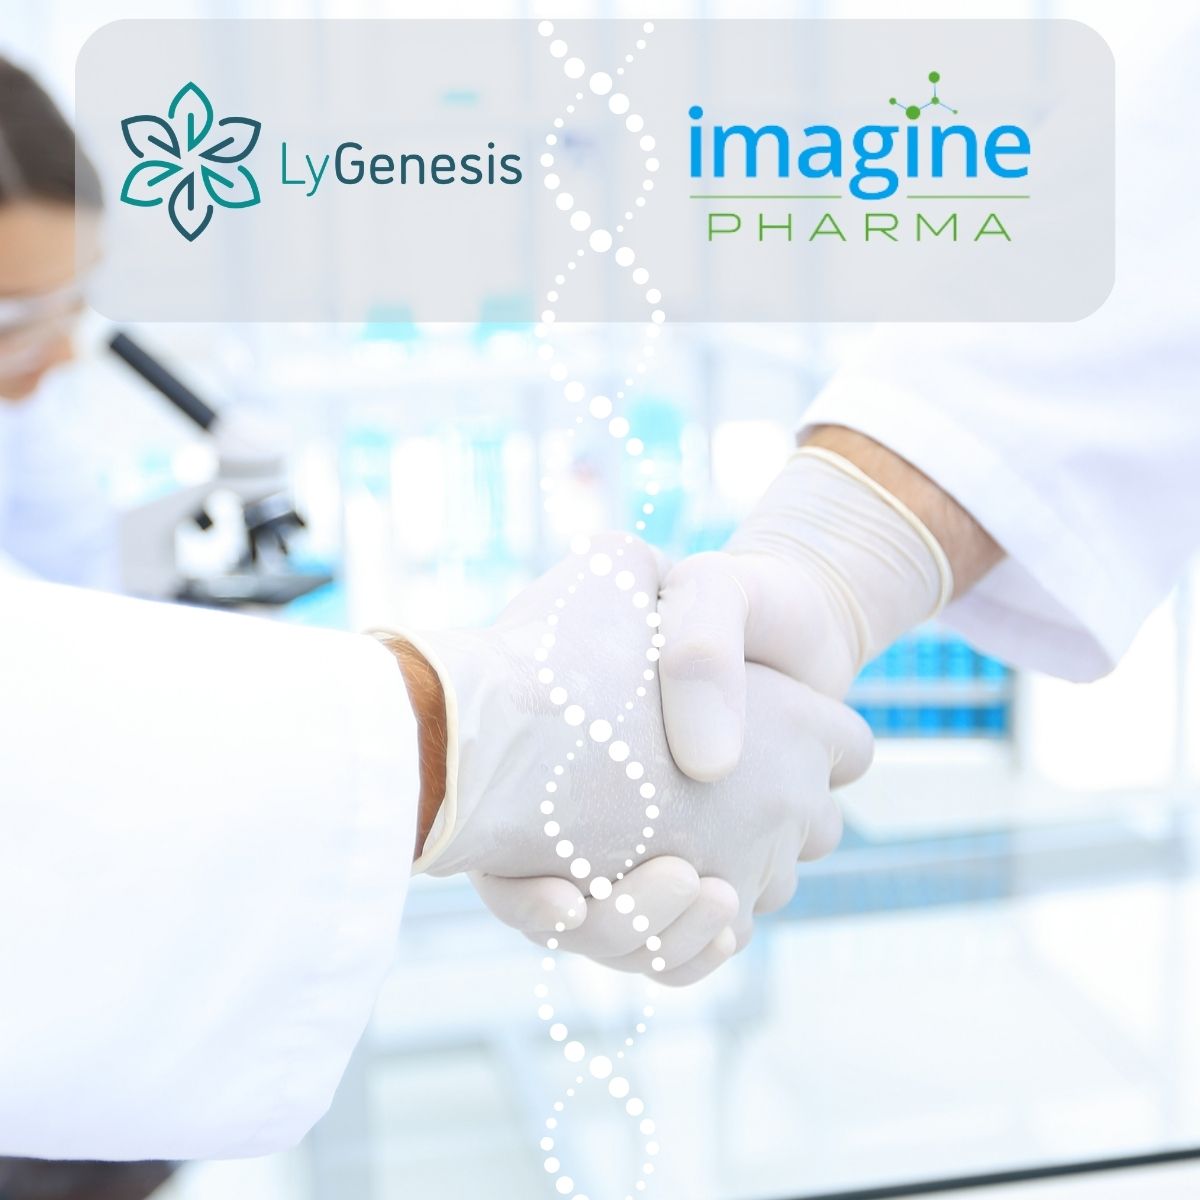 LyGenesis and Imagine Pharma Collaborate on allogeneic cell therapies for patients with type 1 diabetes